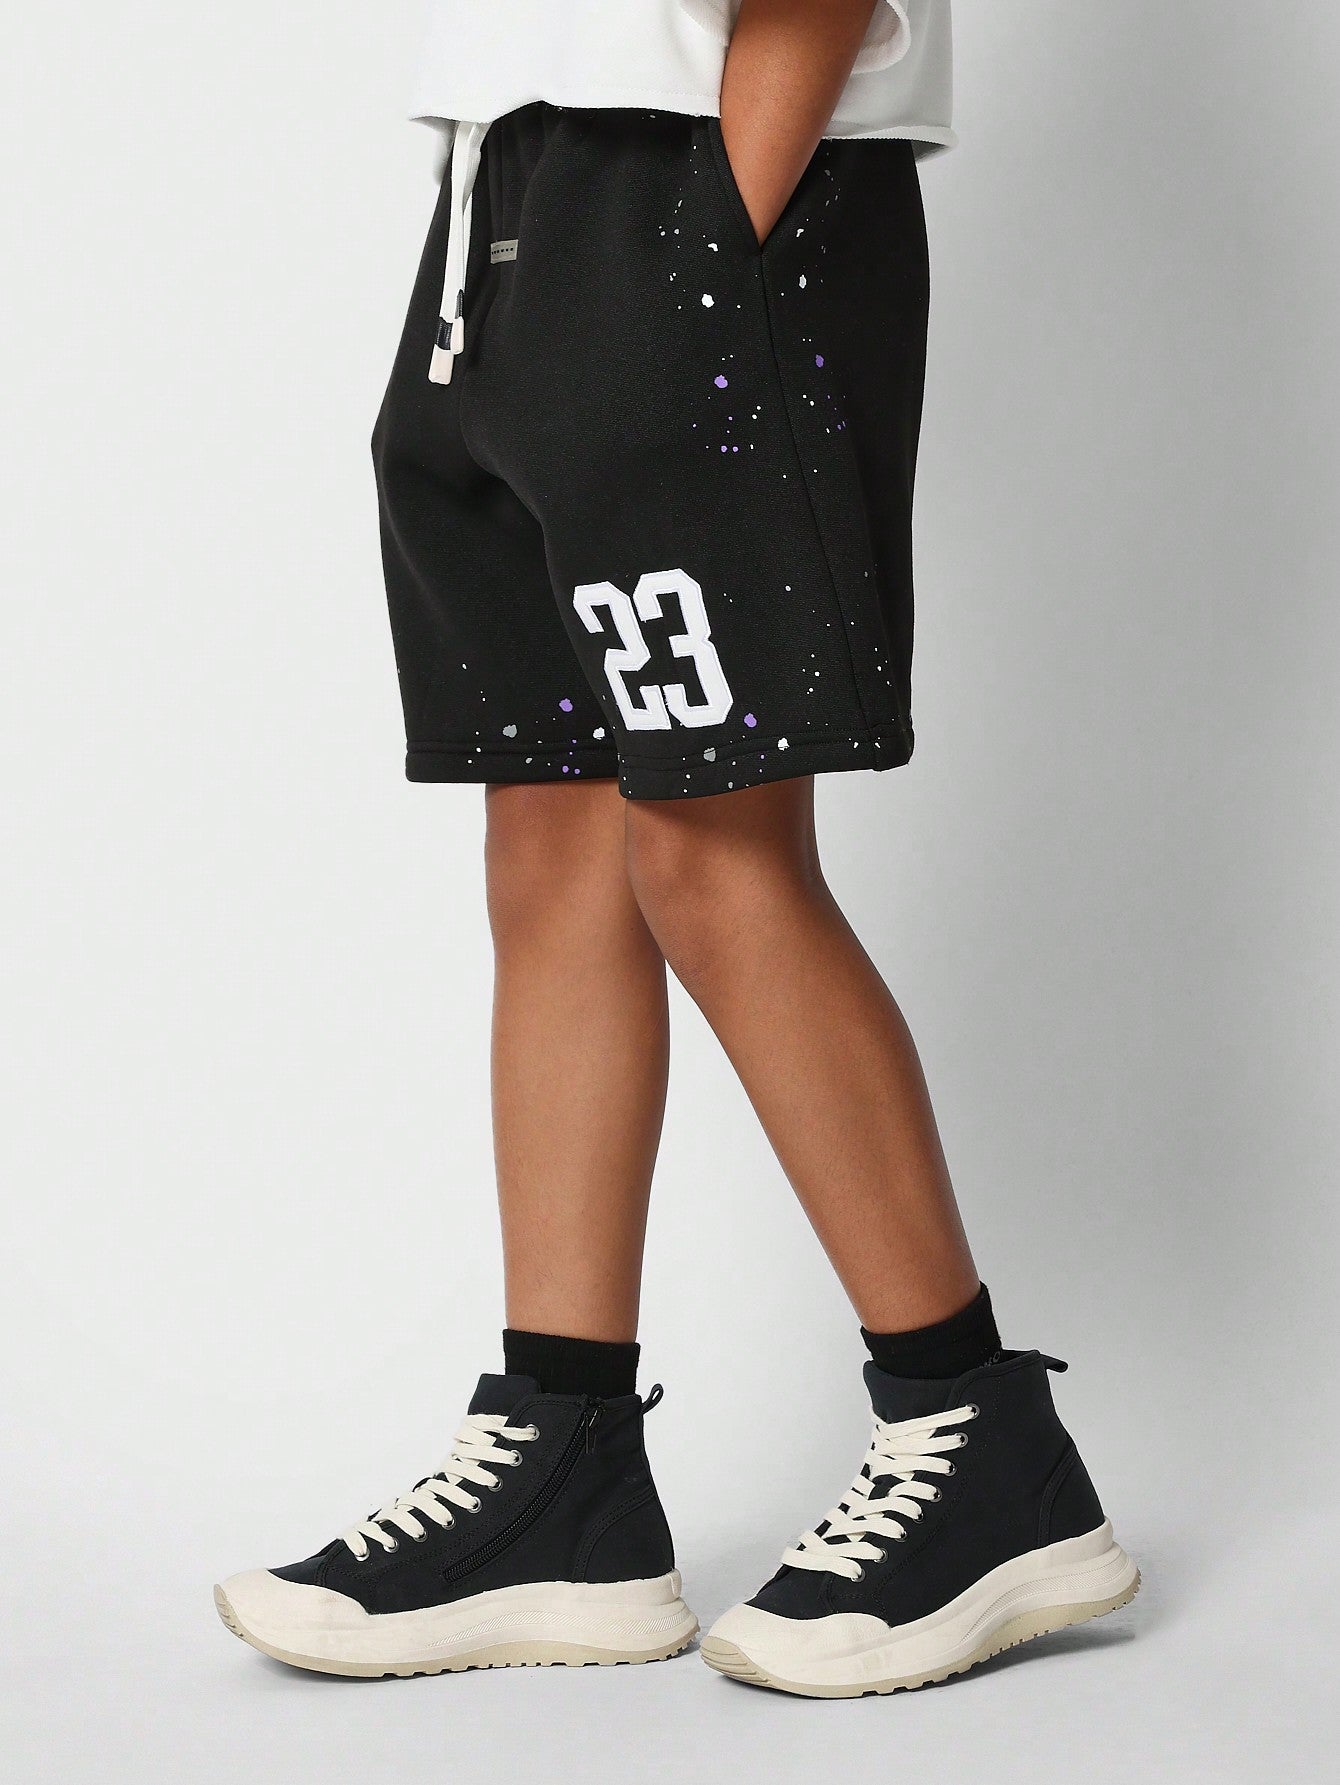 Tween Girls Bermuda Short With Number And Paint Print Back To School